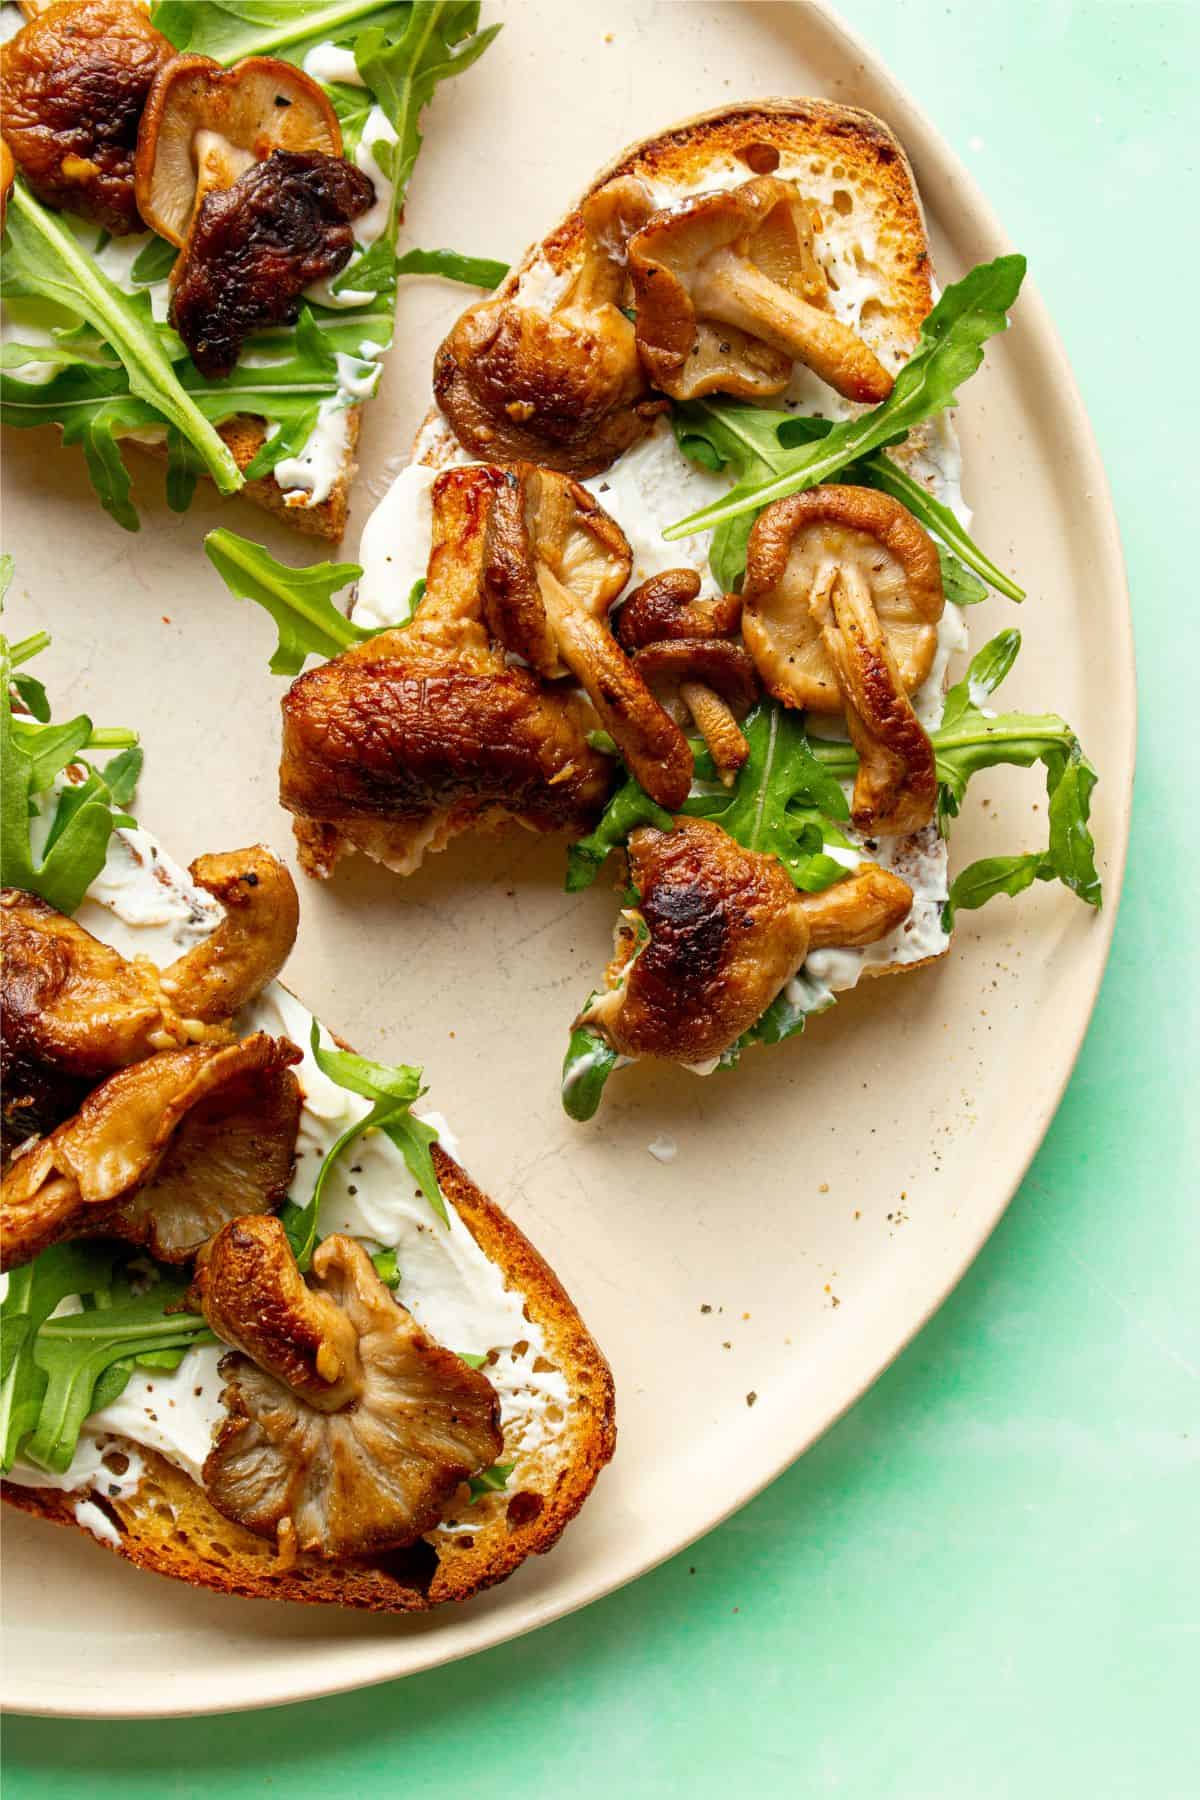 Creamy mushroom toast with cream cheese, browned mushrooms and rocket on a plate with a bite taken from one piece.